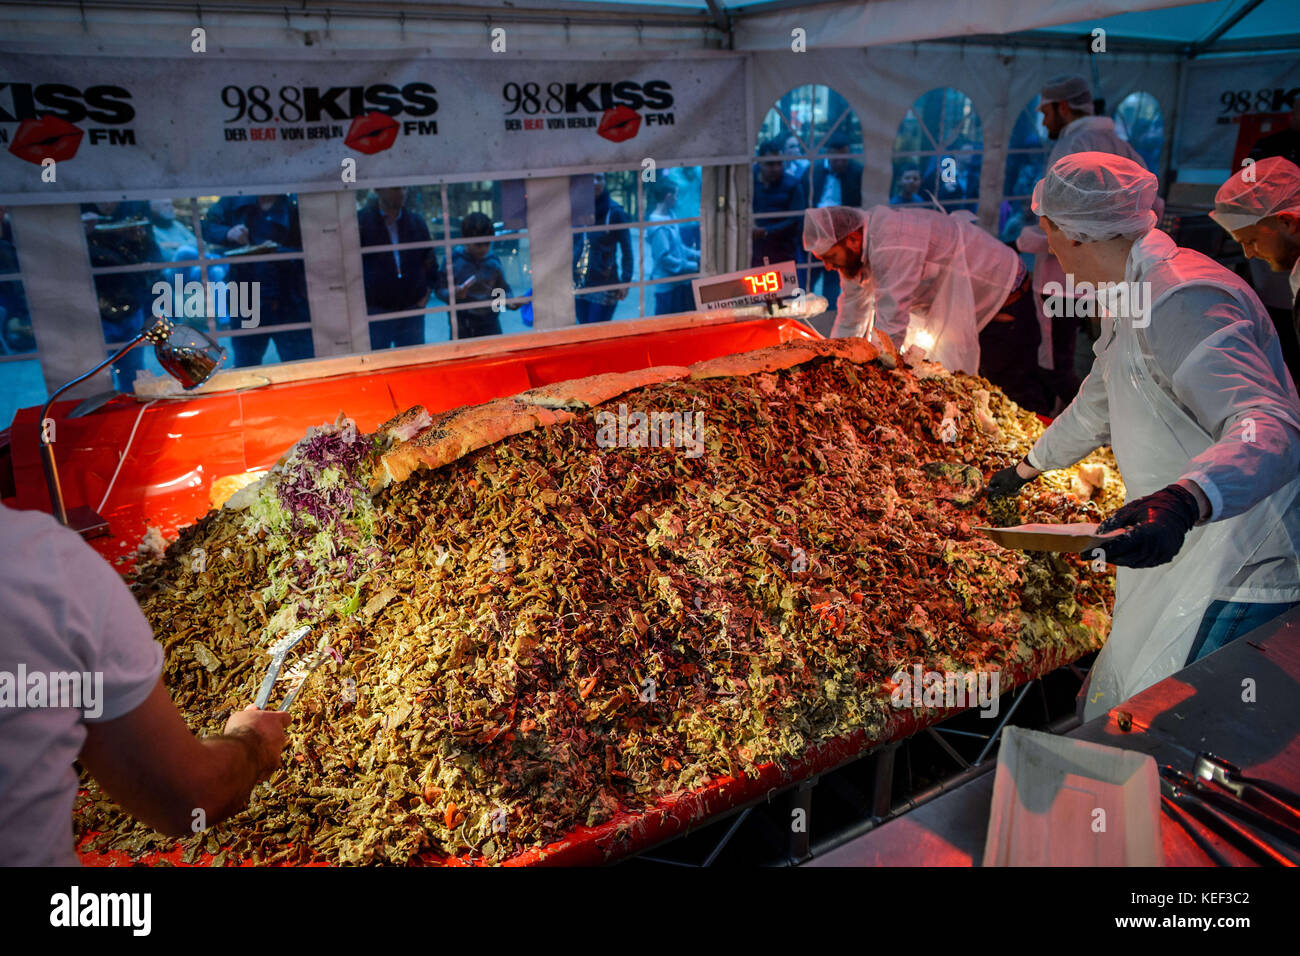 Staff from the Berlin private radio station "98.8 KISS FM" prepare to break  the record for the world's largest doner kebab in Berlin, Germany, 20  October 2017. The kebab broke the record,